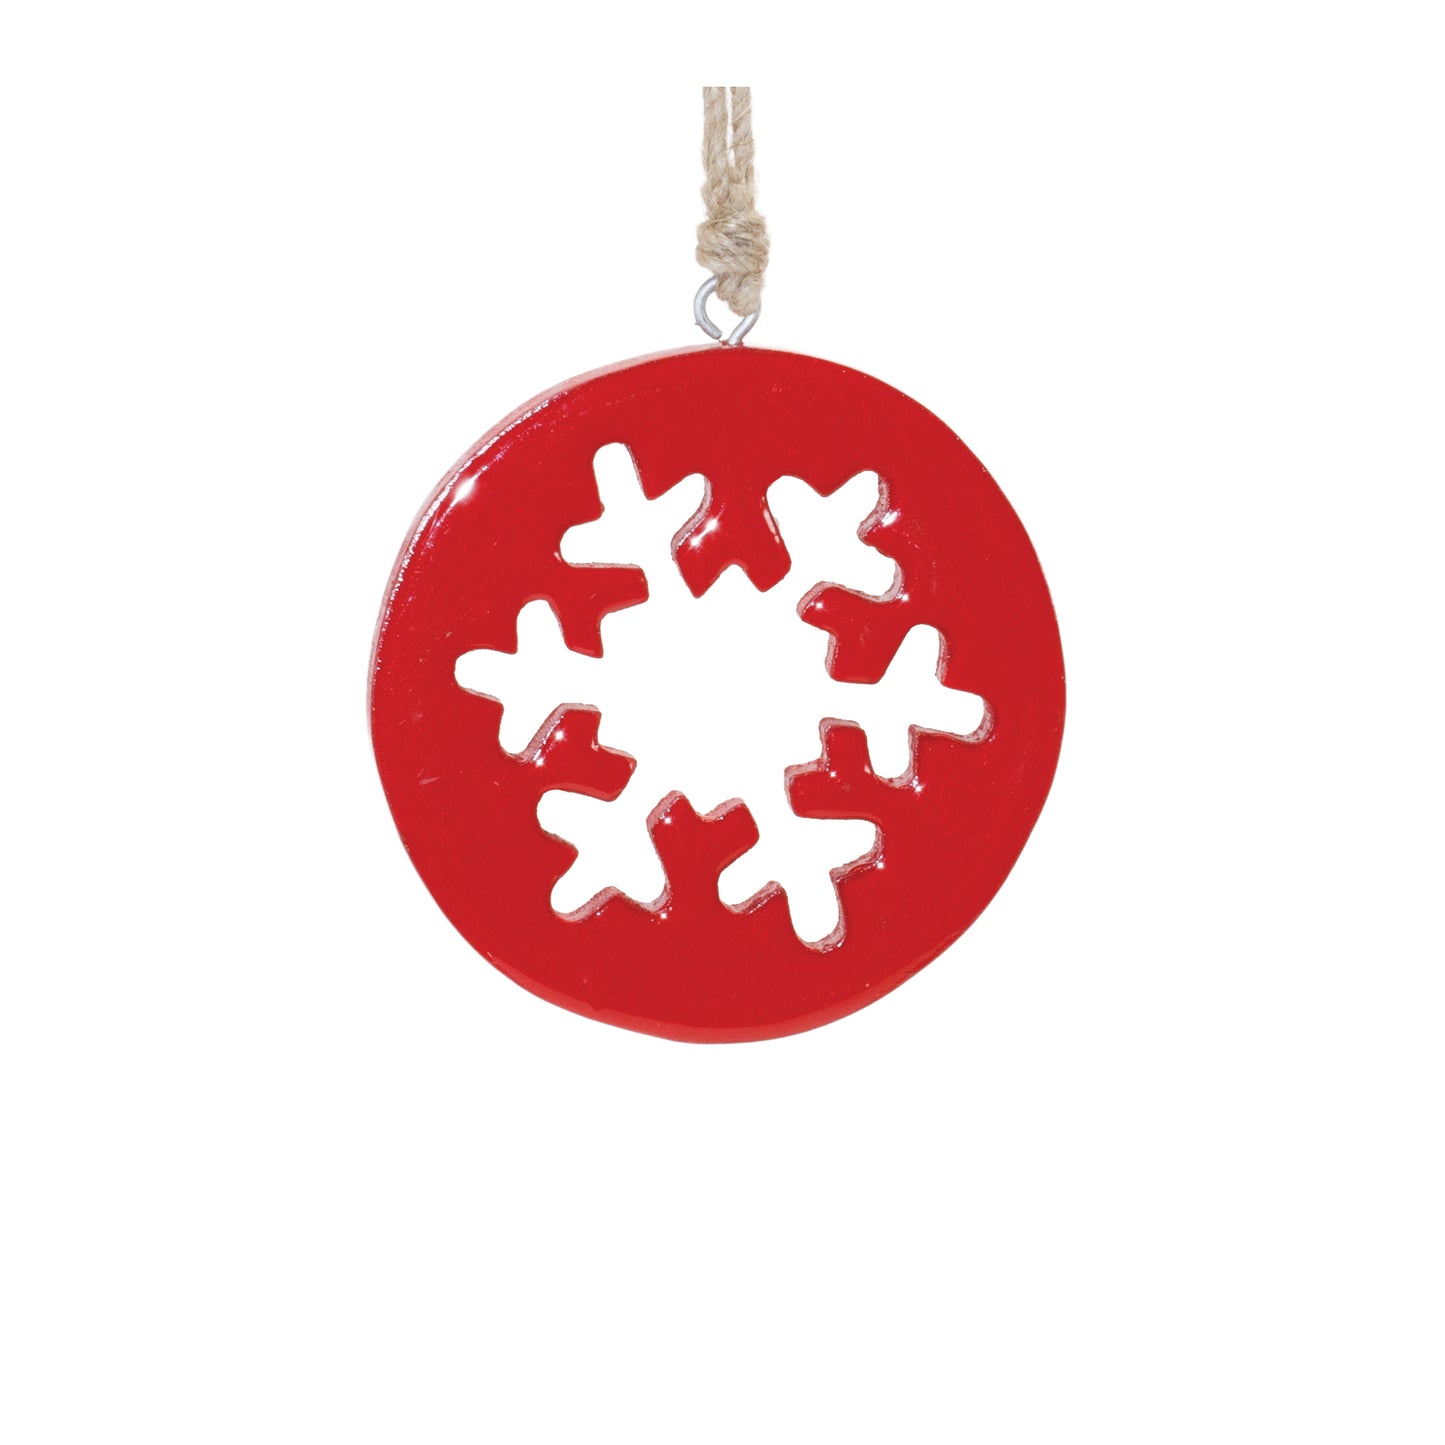 Snowflake Cut-Out Ornaments